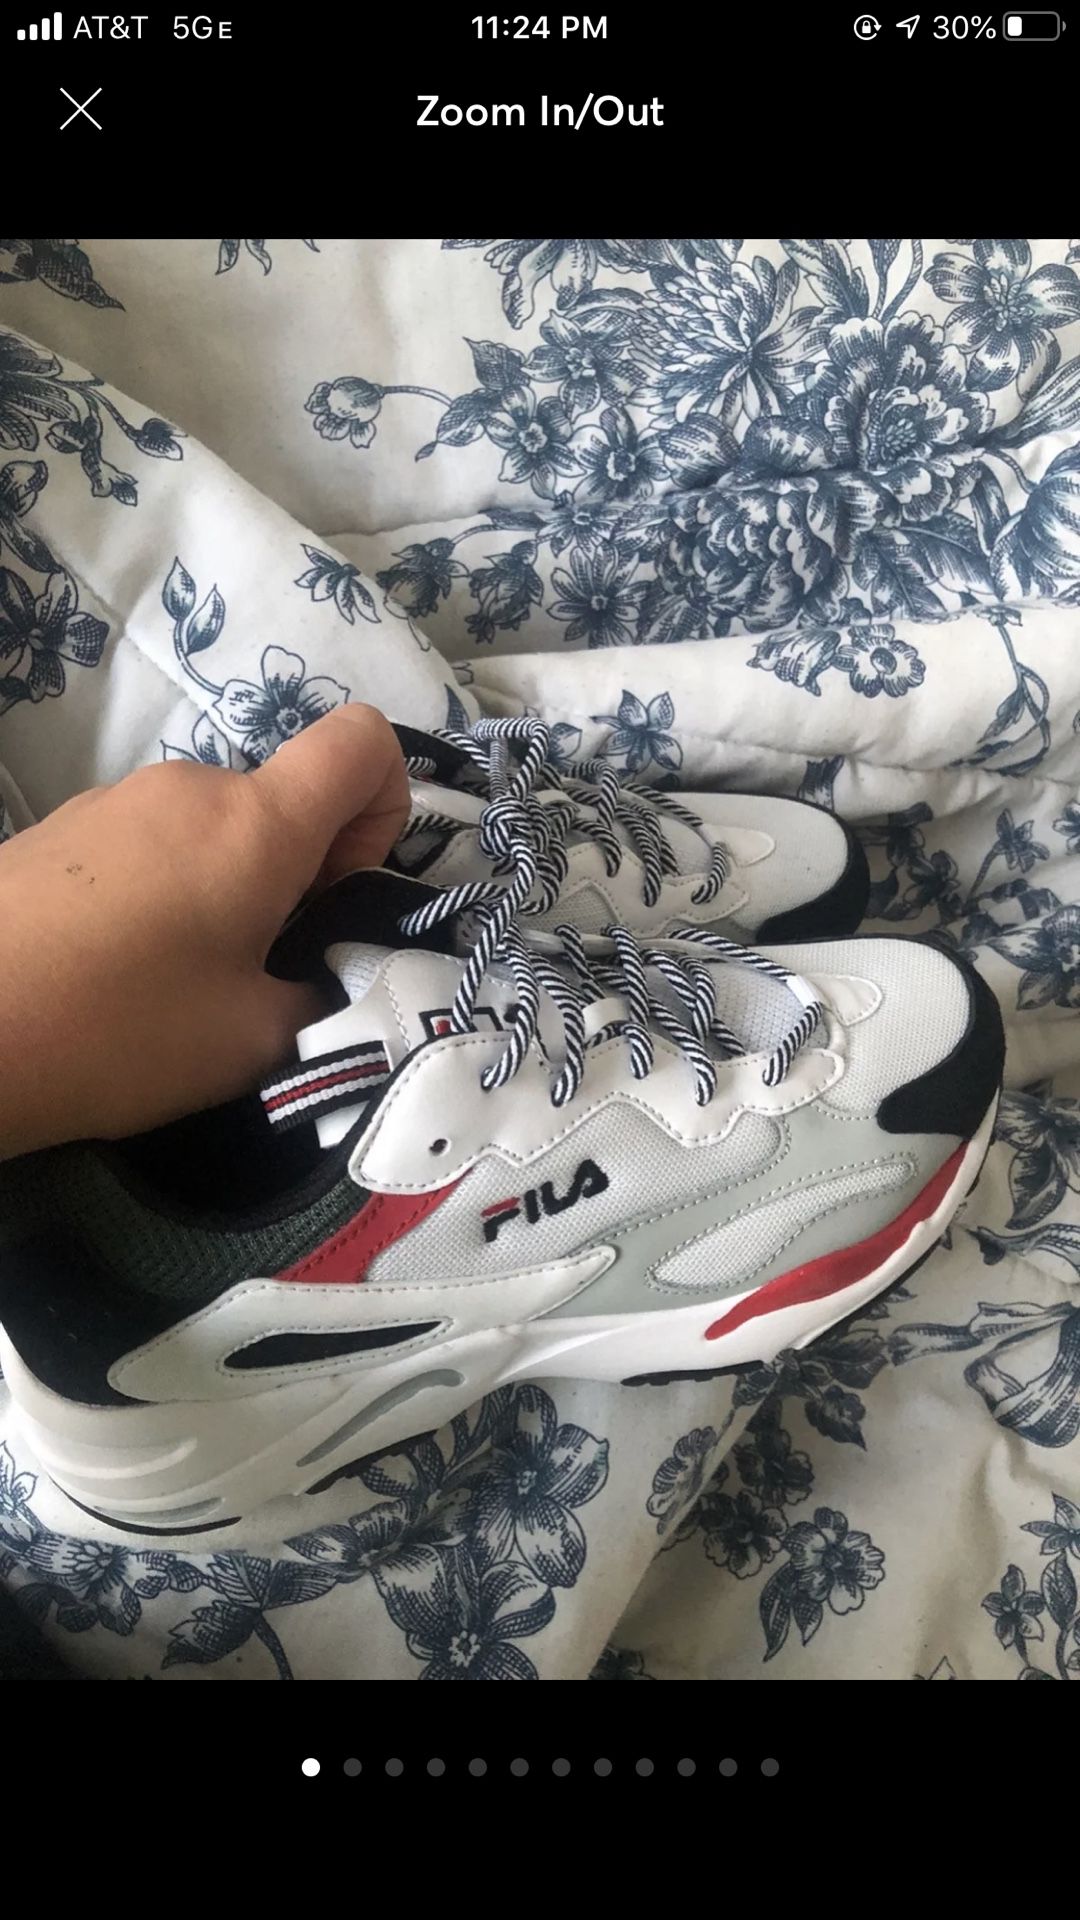 new fila ray tracer shoes (brand new)